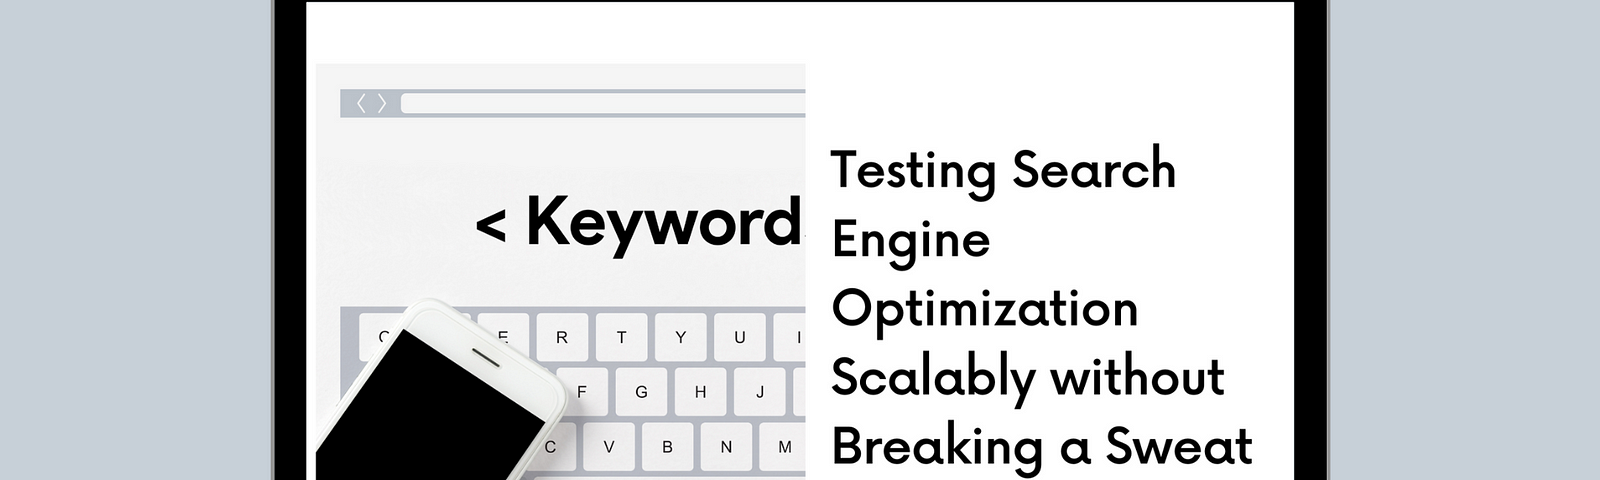 Header image that says “Testing Search Engine Optimization Scalably without Breaking a Sweat”